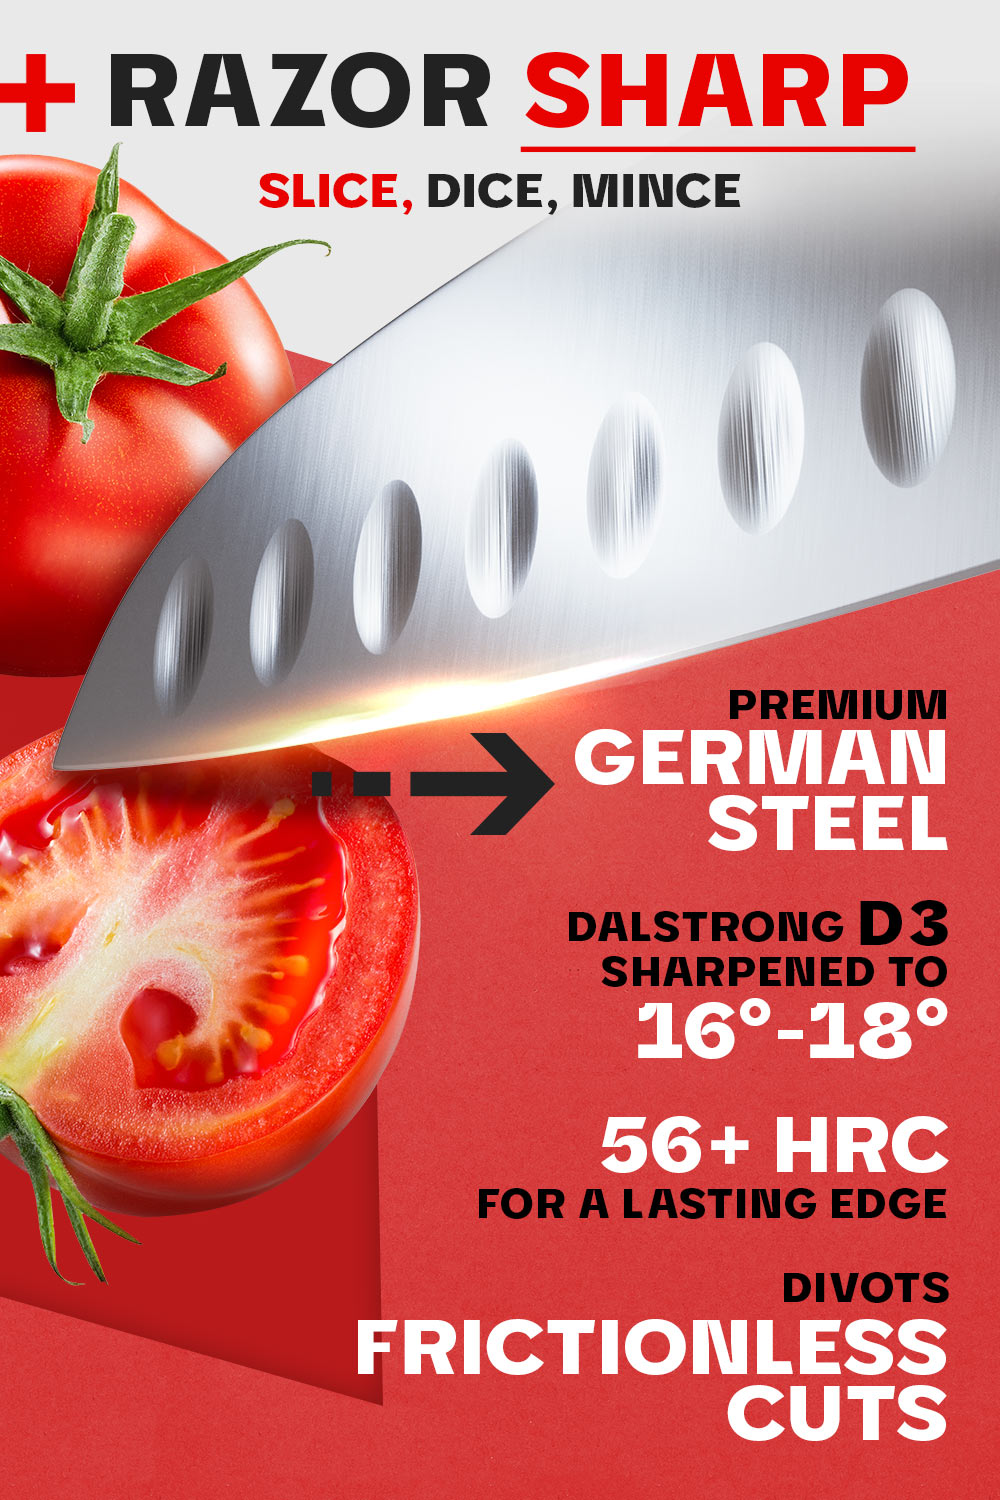 Dalstrong gladiator series 7 inch santoku knife with red handle featuring it's razor sharp german steel blade.